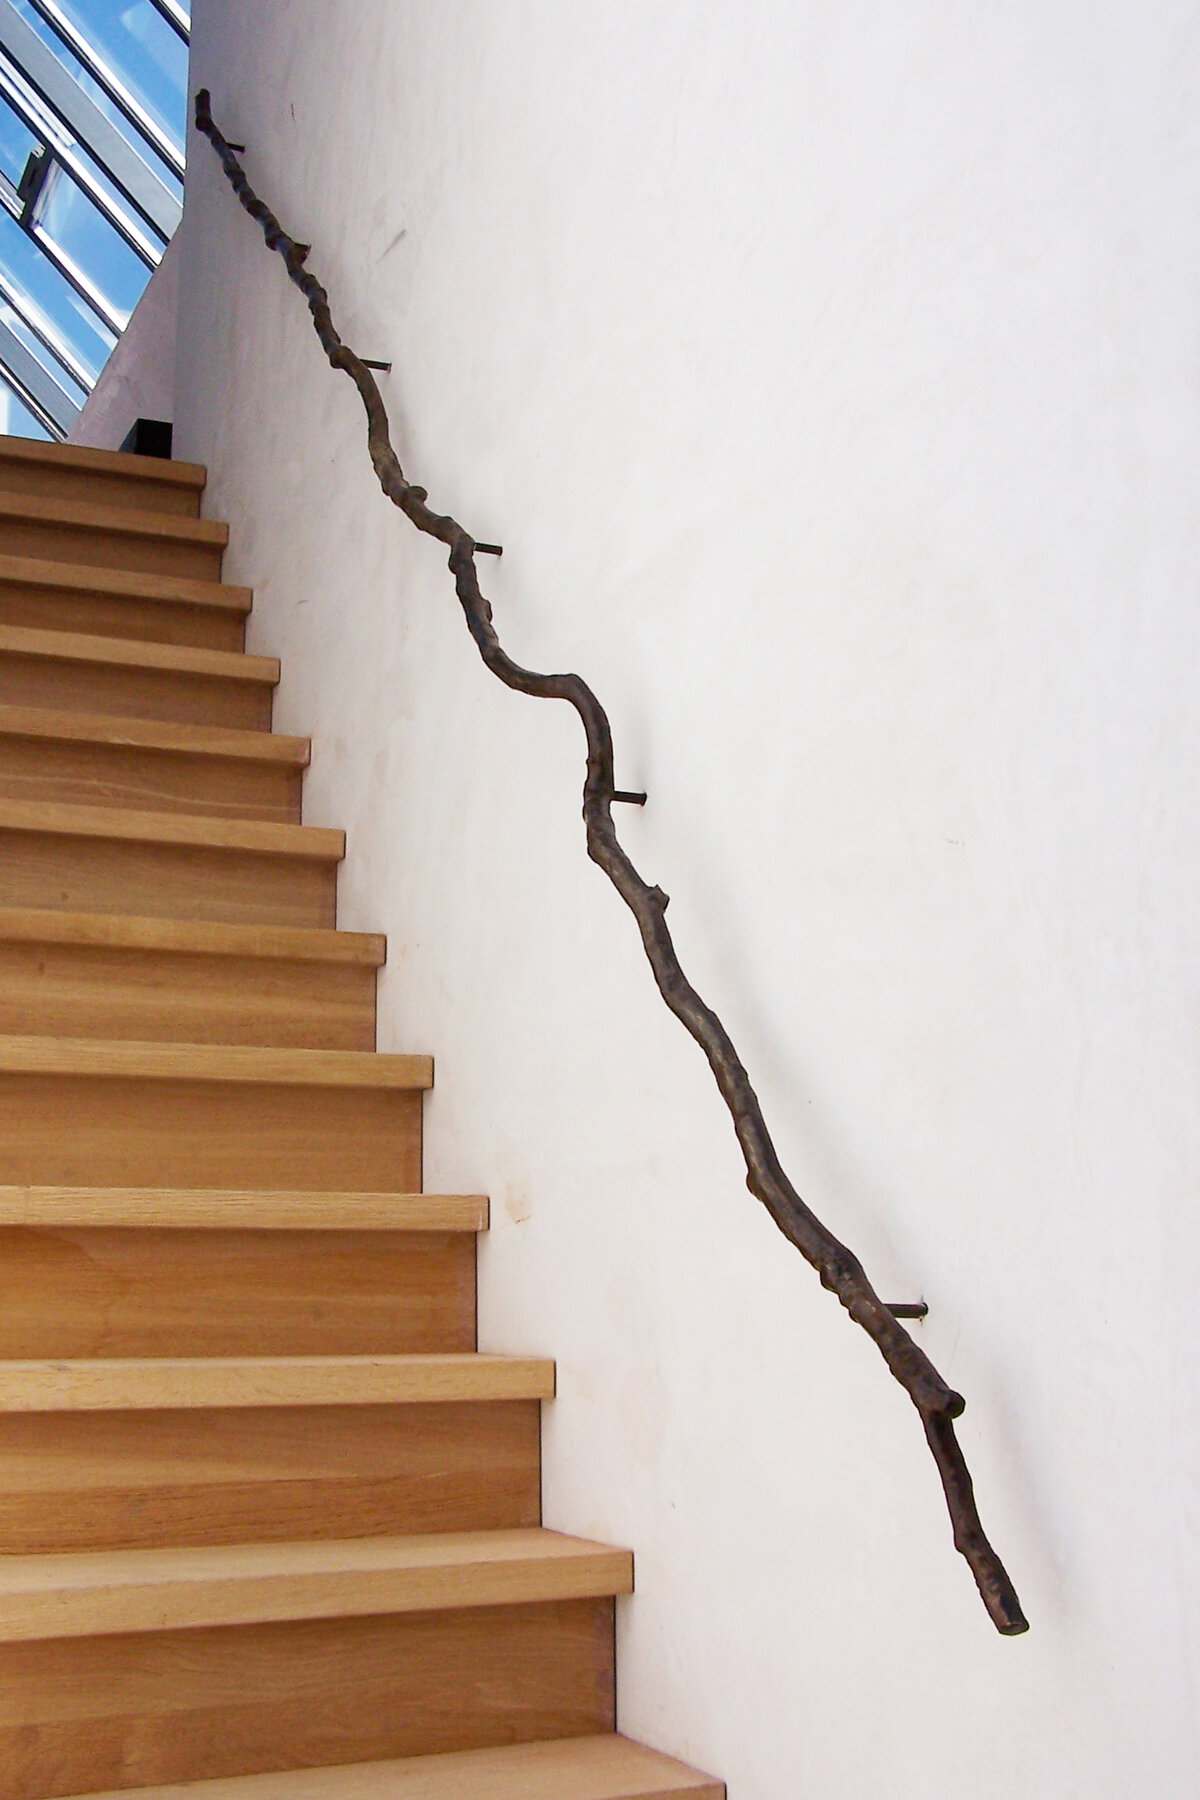 staircase with a long tree branch attached to the wall for a handle